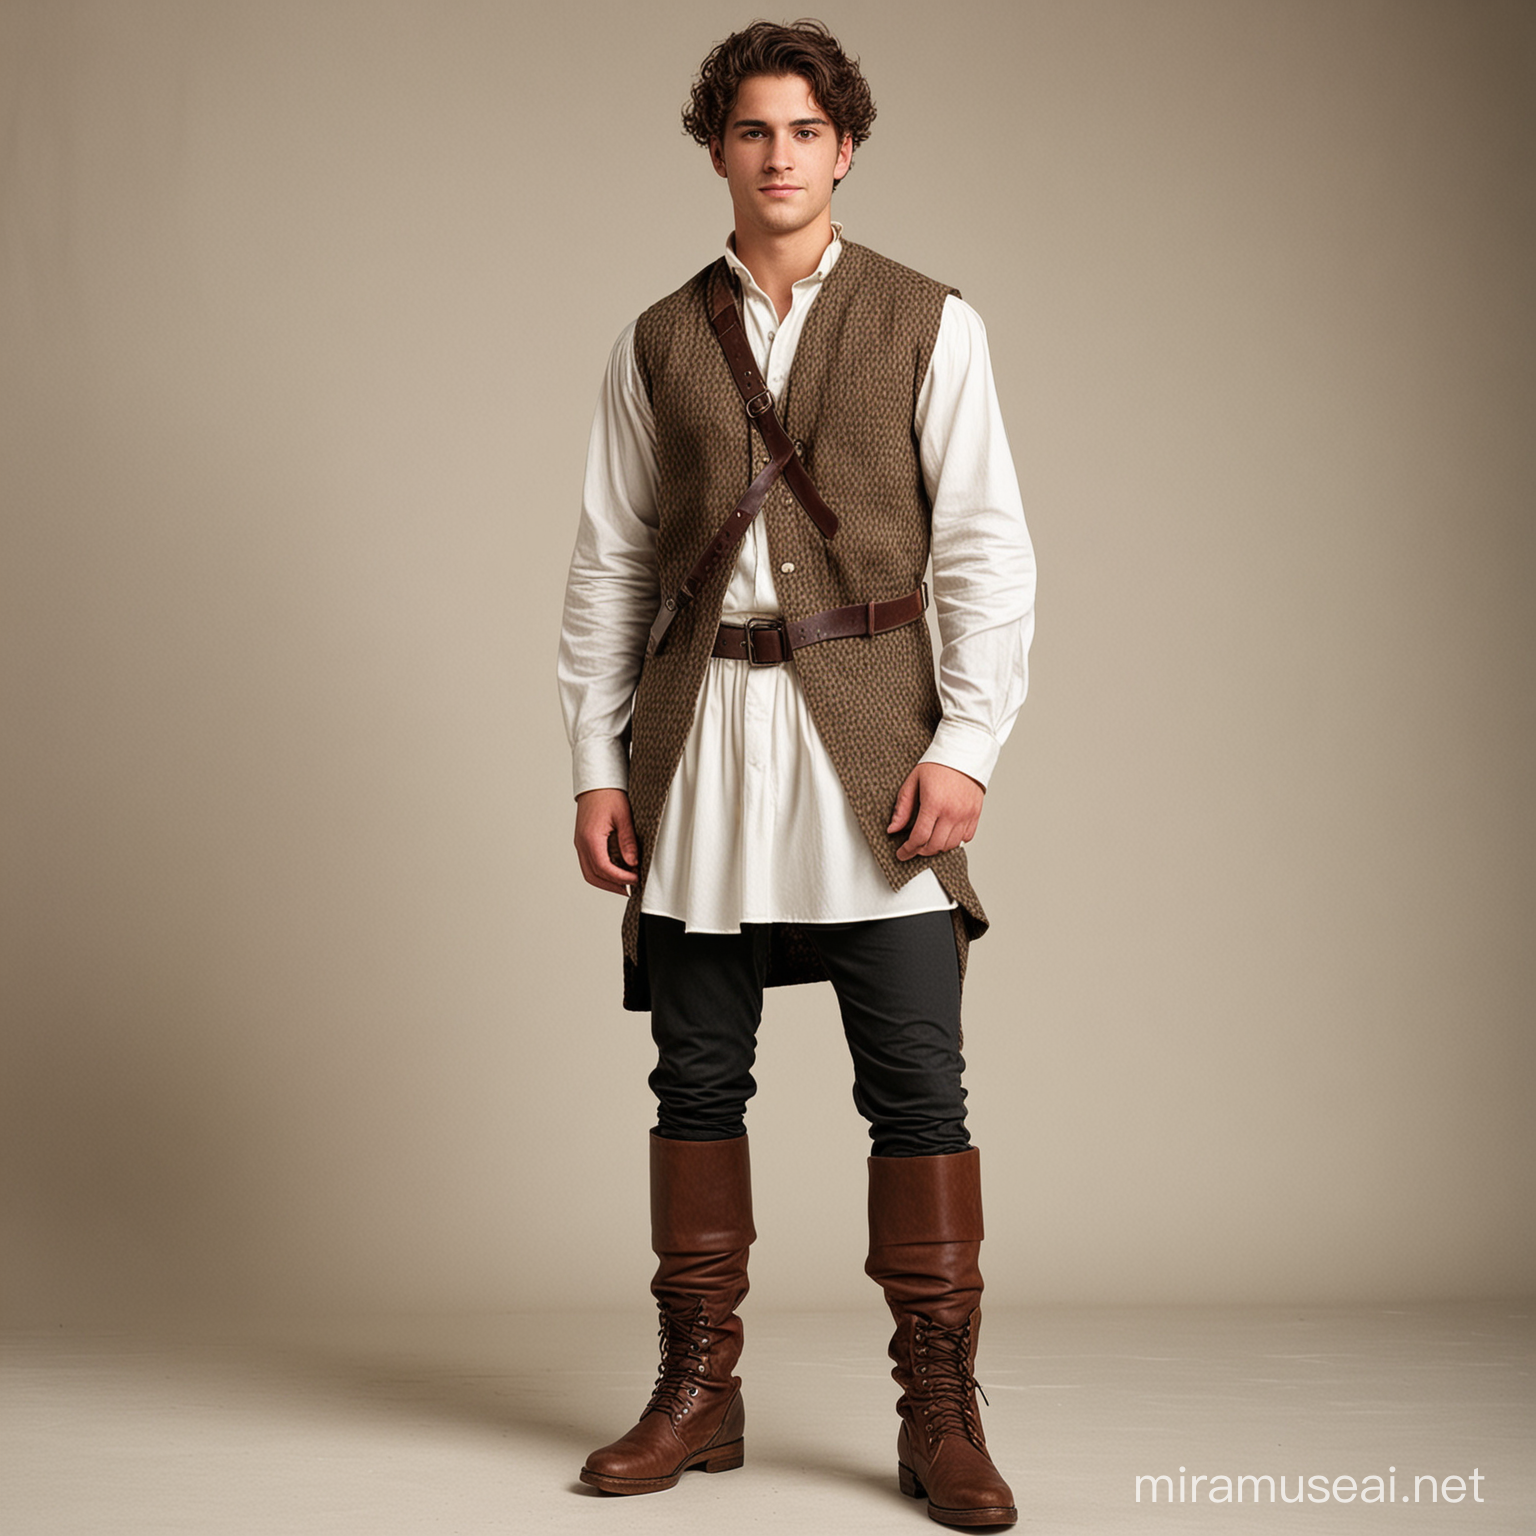 Medieval Young Man in Tunic Vest Pants and Boots